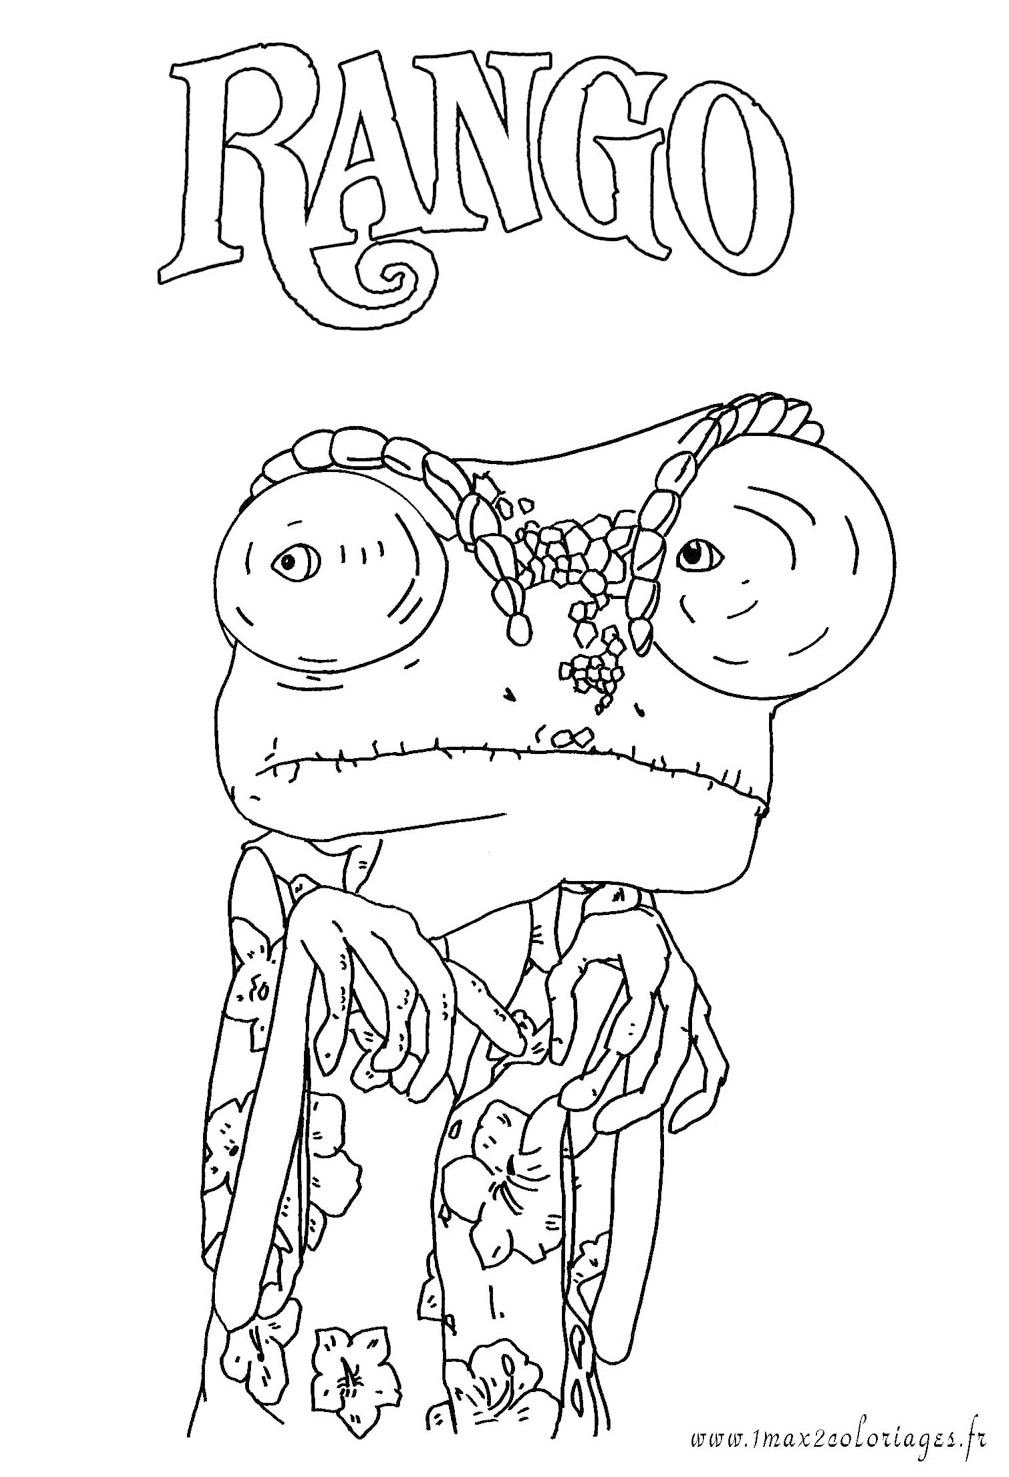 Rango is Sad Coloring Pages